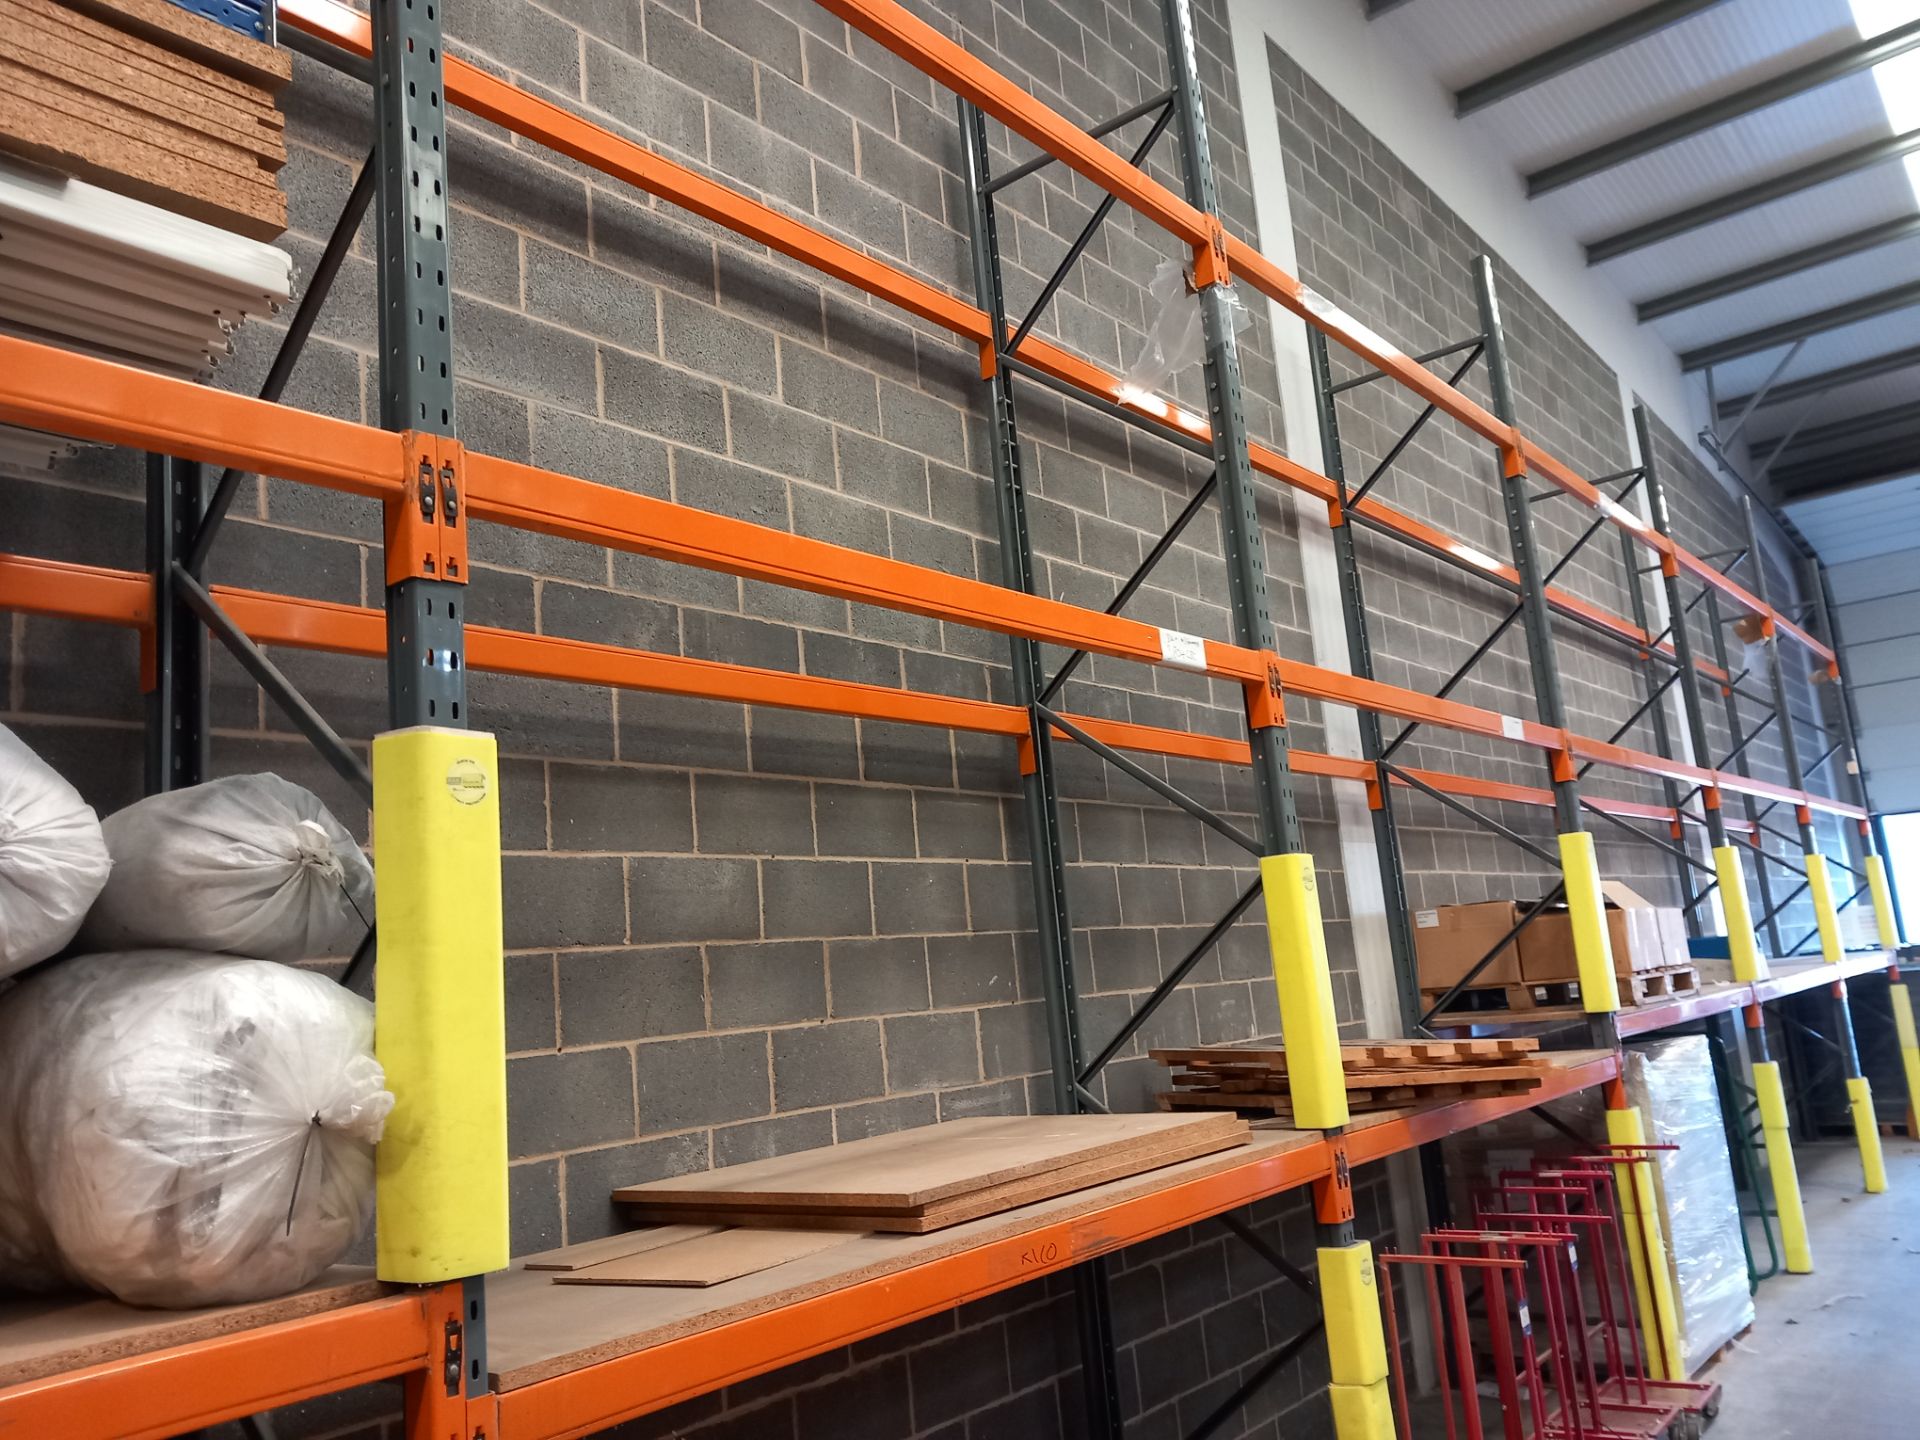 16 Bays of Dexion Speedlock boltless steel pallet racking with spare beams & guard railing & shelf - Image 4 of 9